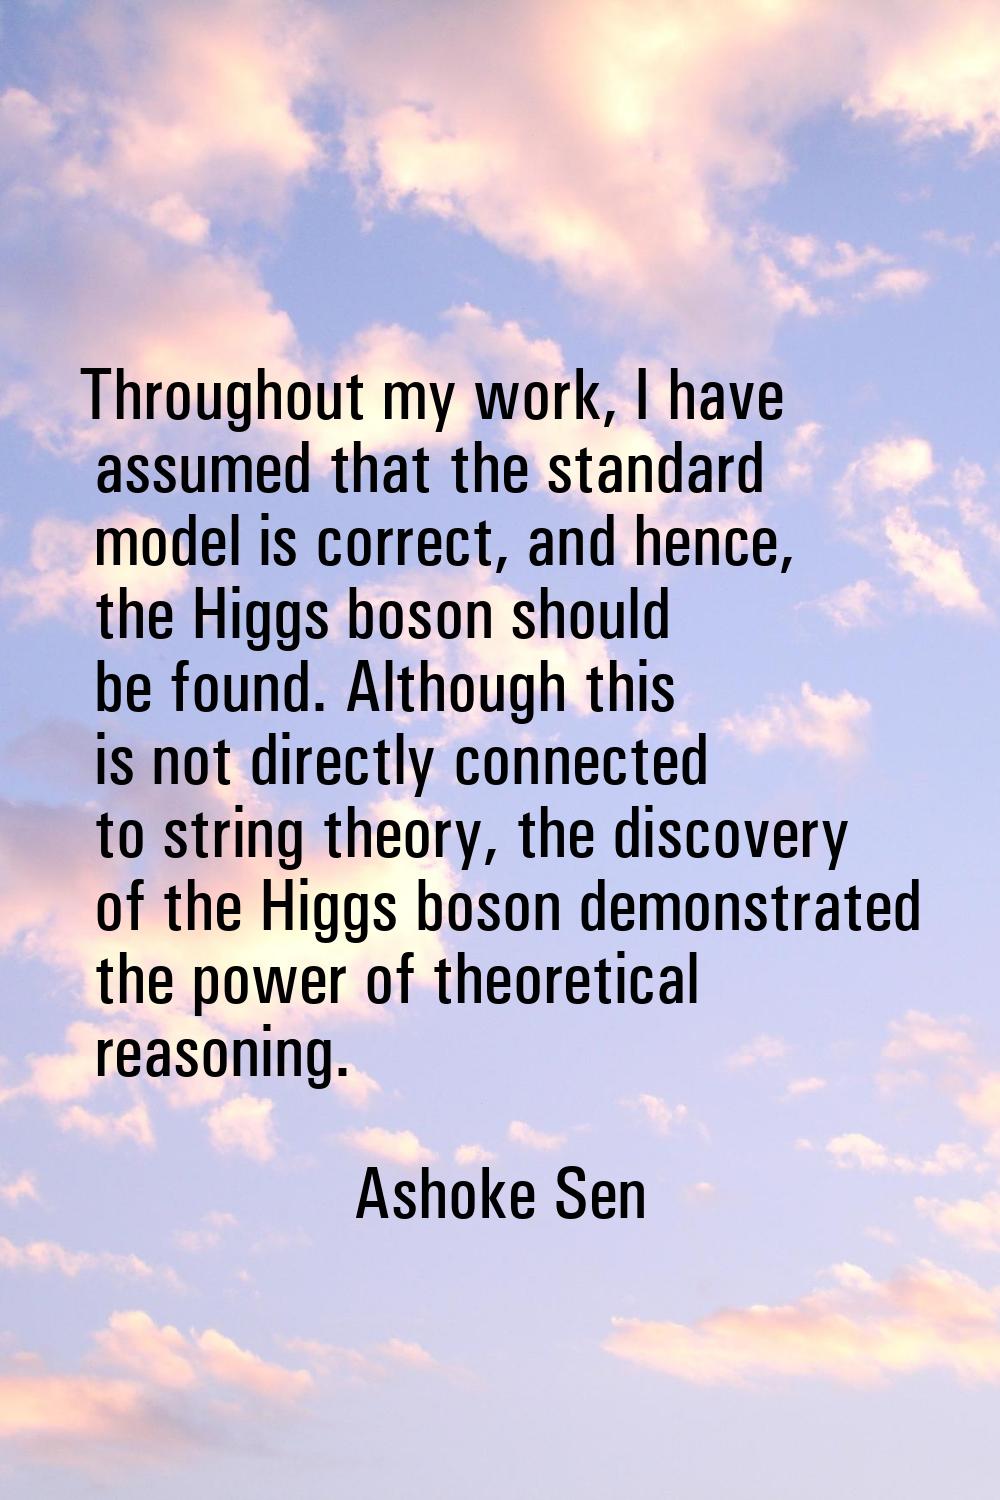 Throughout my work, I have assumed that the standard model is correct, and hence, the Higgs boson s